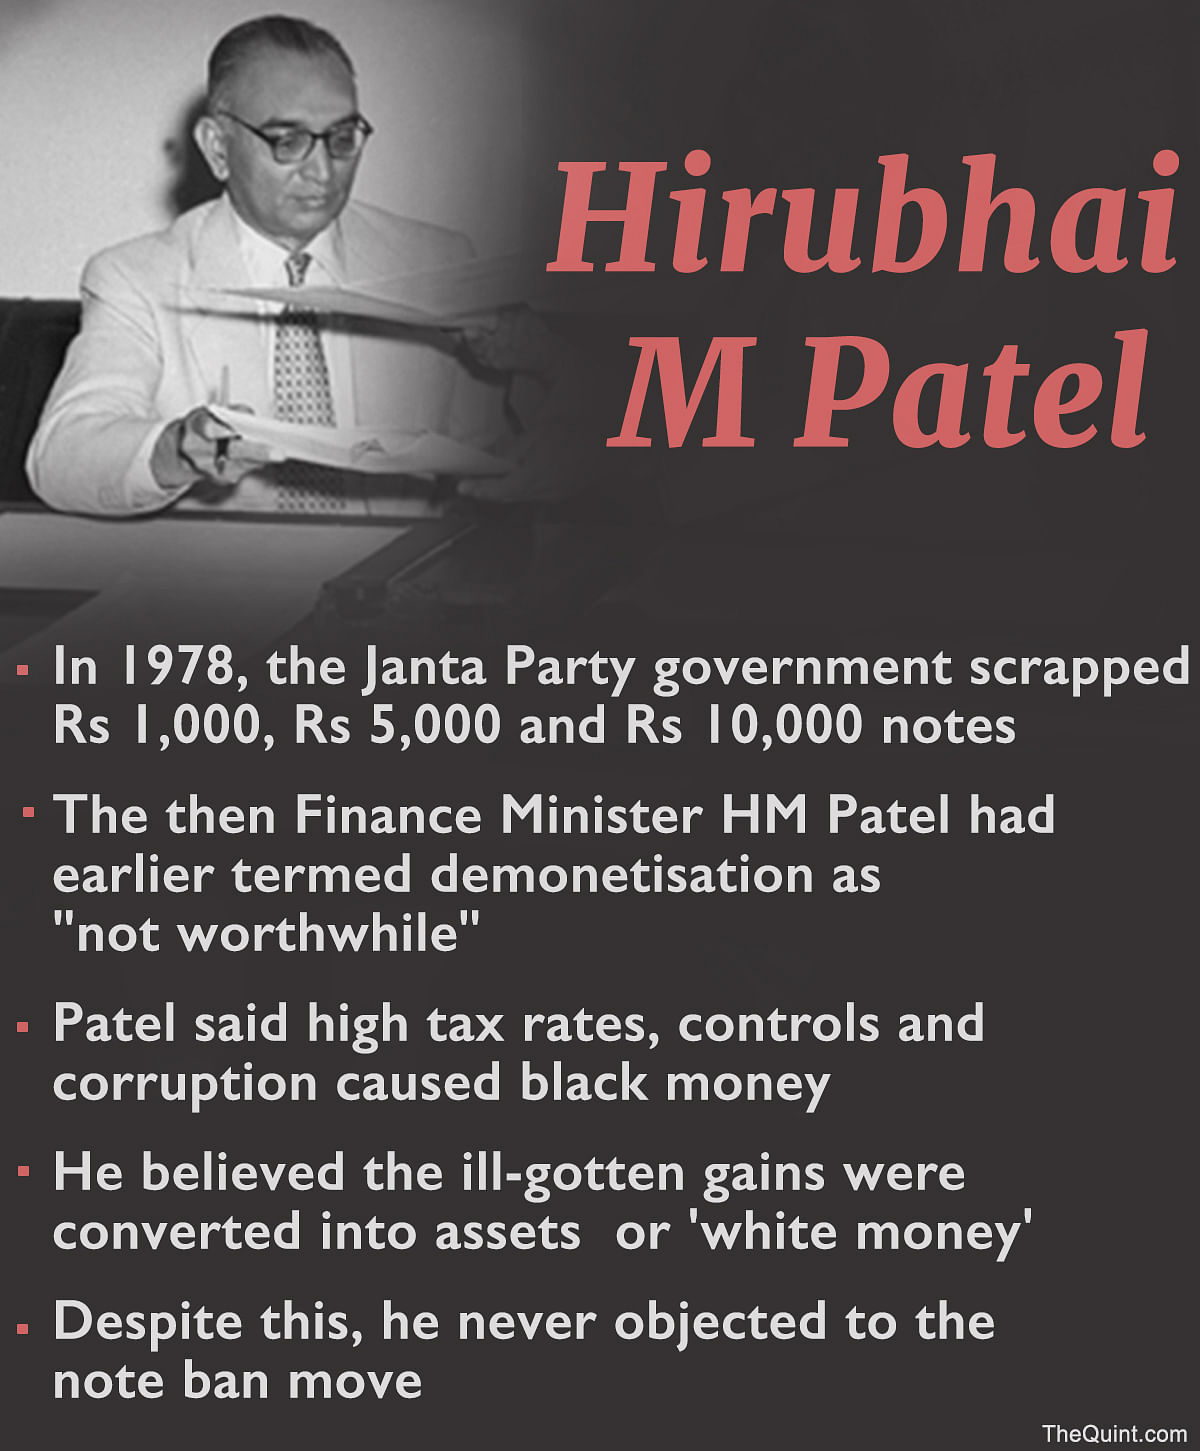 

Despite strong views against note ban, HM Patel did not object to its implementation in 1978.